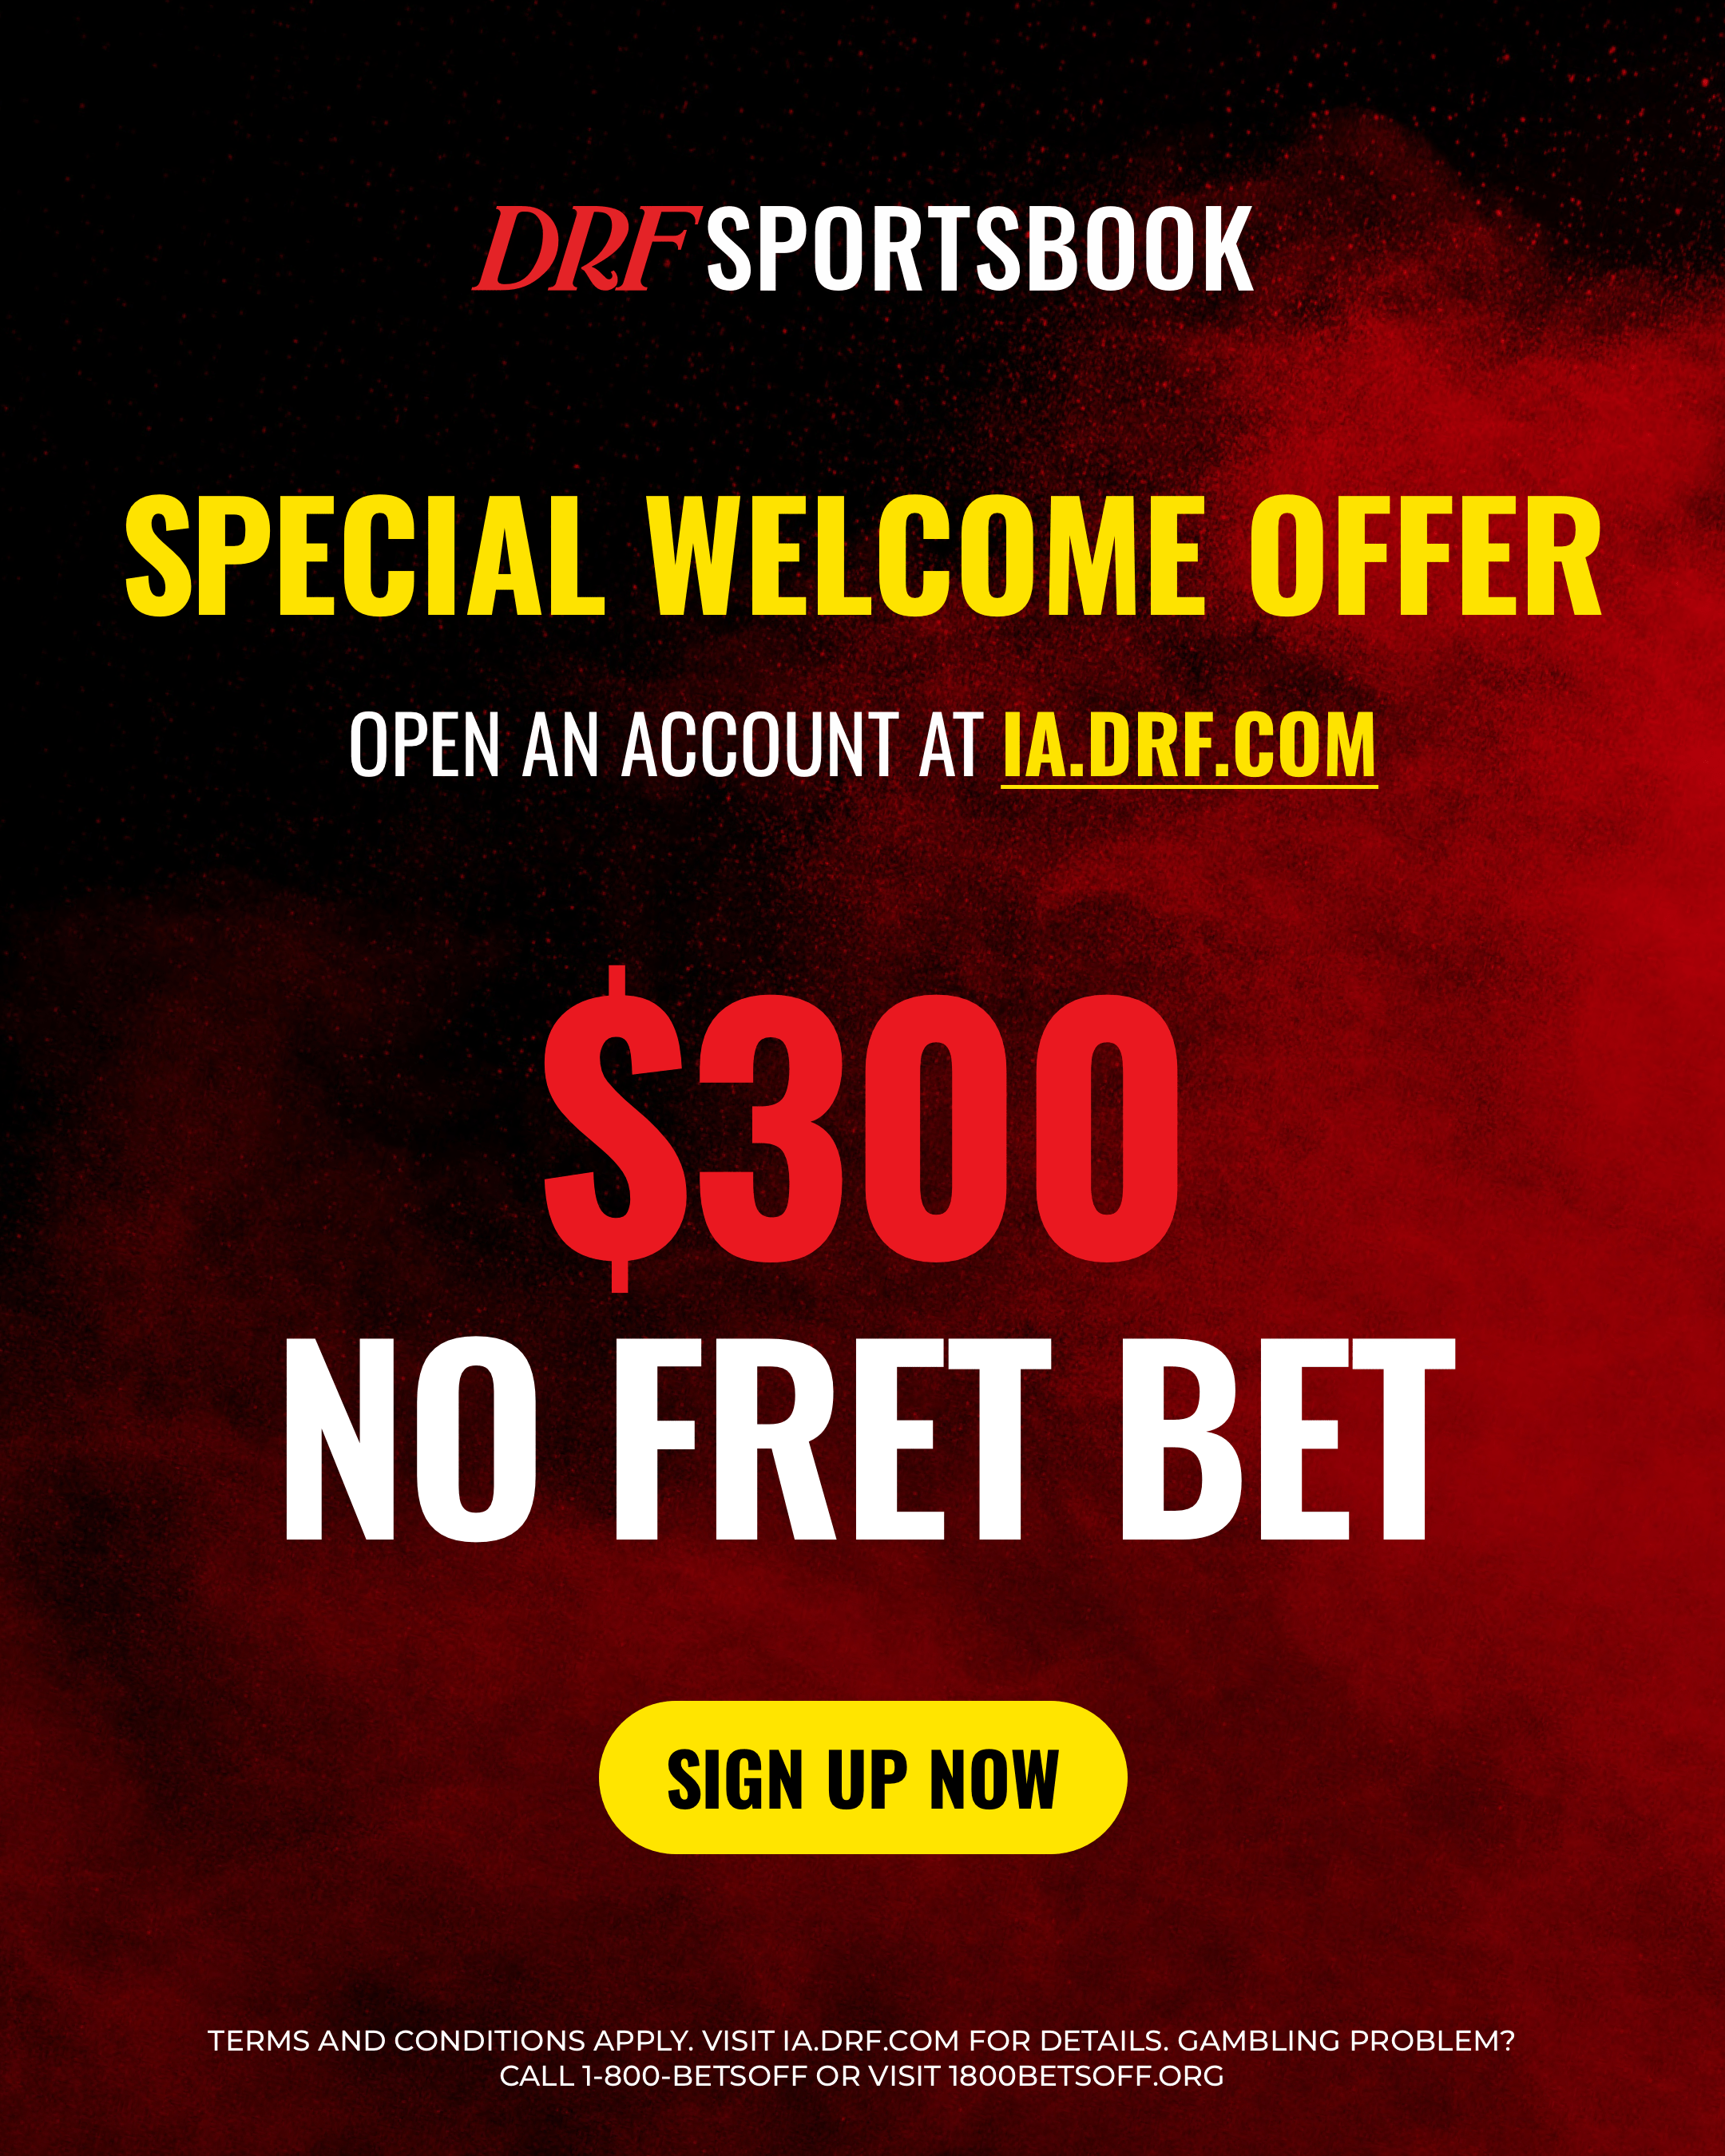 DRF-Sportsbook-MAIN-$300-No-Fret-Bet-Welcome-Offer-1080x1350-without-football-player-2x